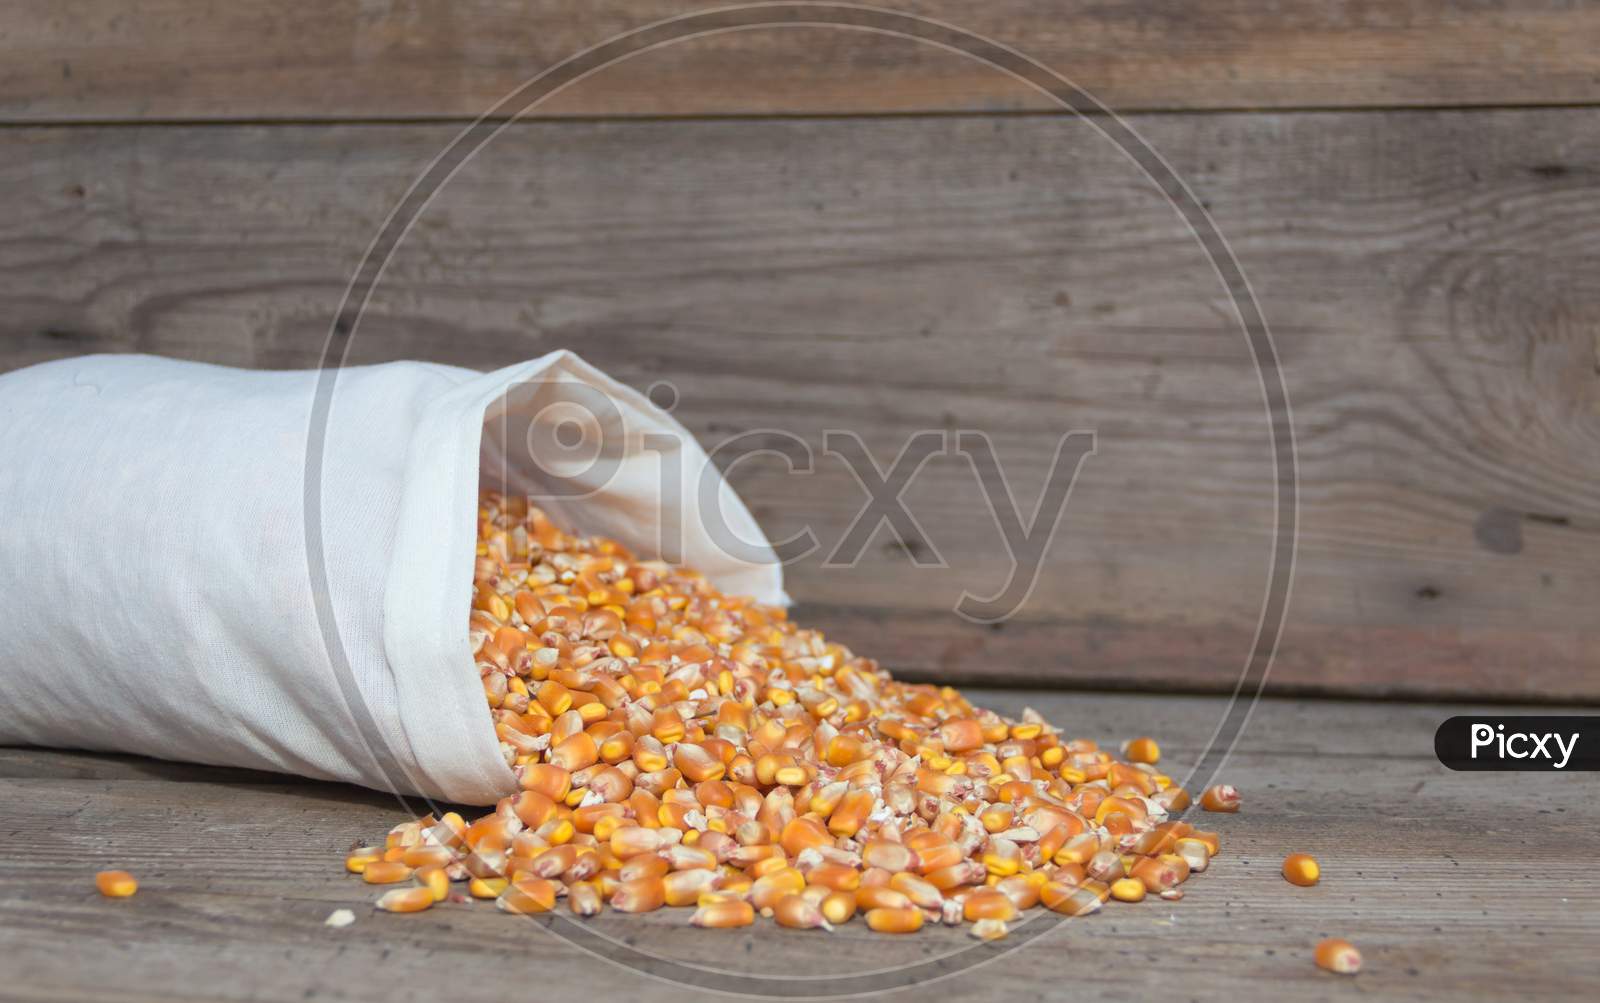 Whole Corn Grains For Animal Feed For Sale In The Forage